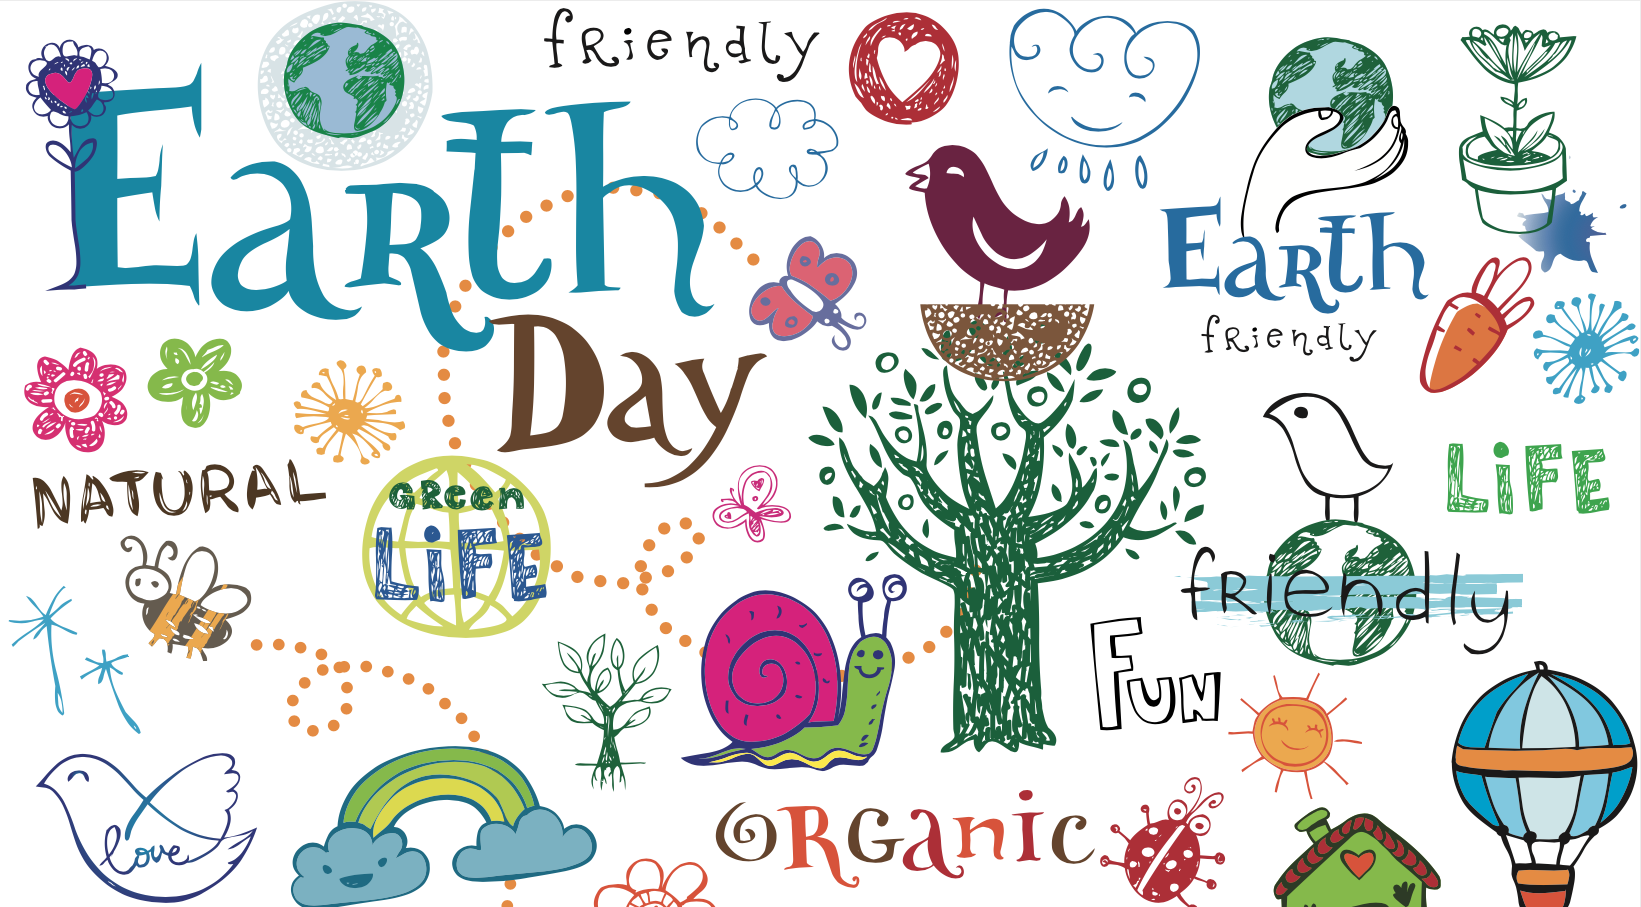 Leadership & Sustainability wishes a Happy Earth Day 2020!